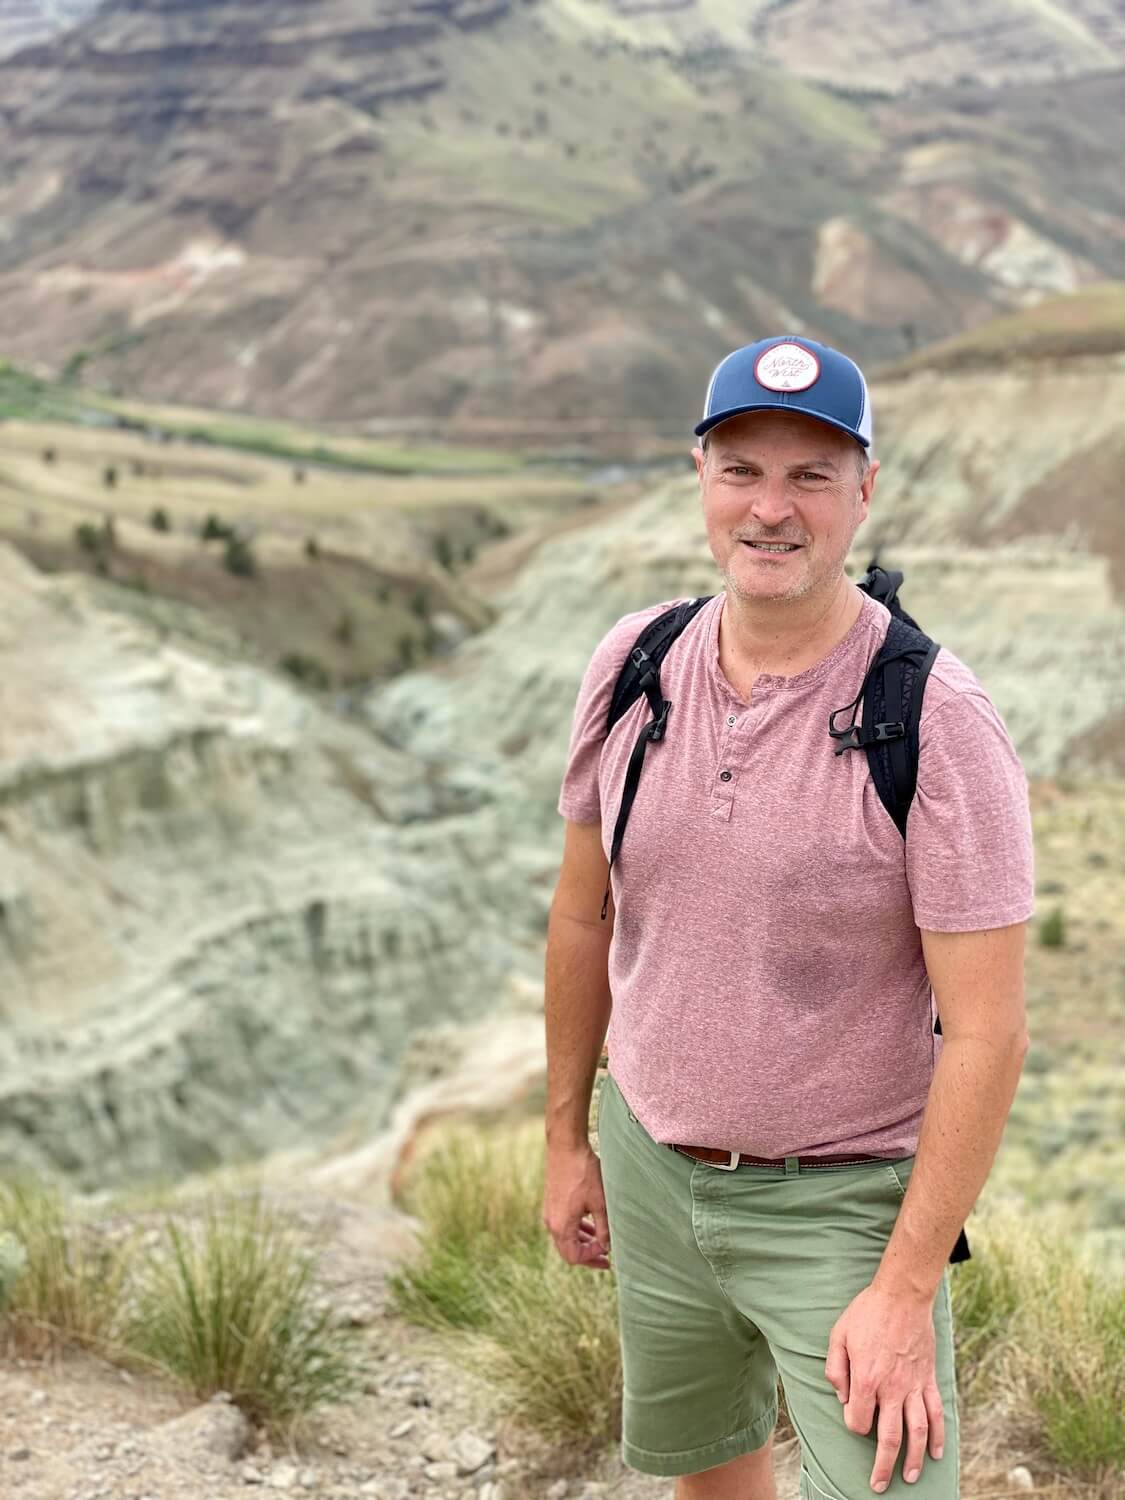 Matthew Kessi poses for a selfie on the Blue Ridge Overlook Trail.  The blue formations of rock are out of focus in the background as he stands there with a red shirt and green shorts.  